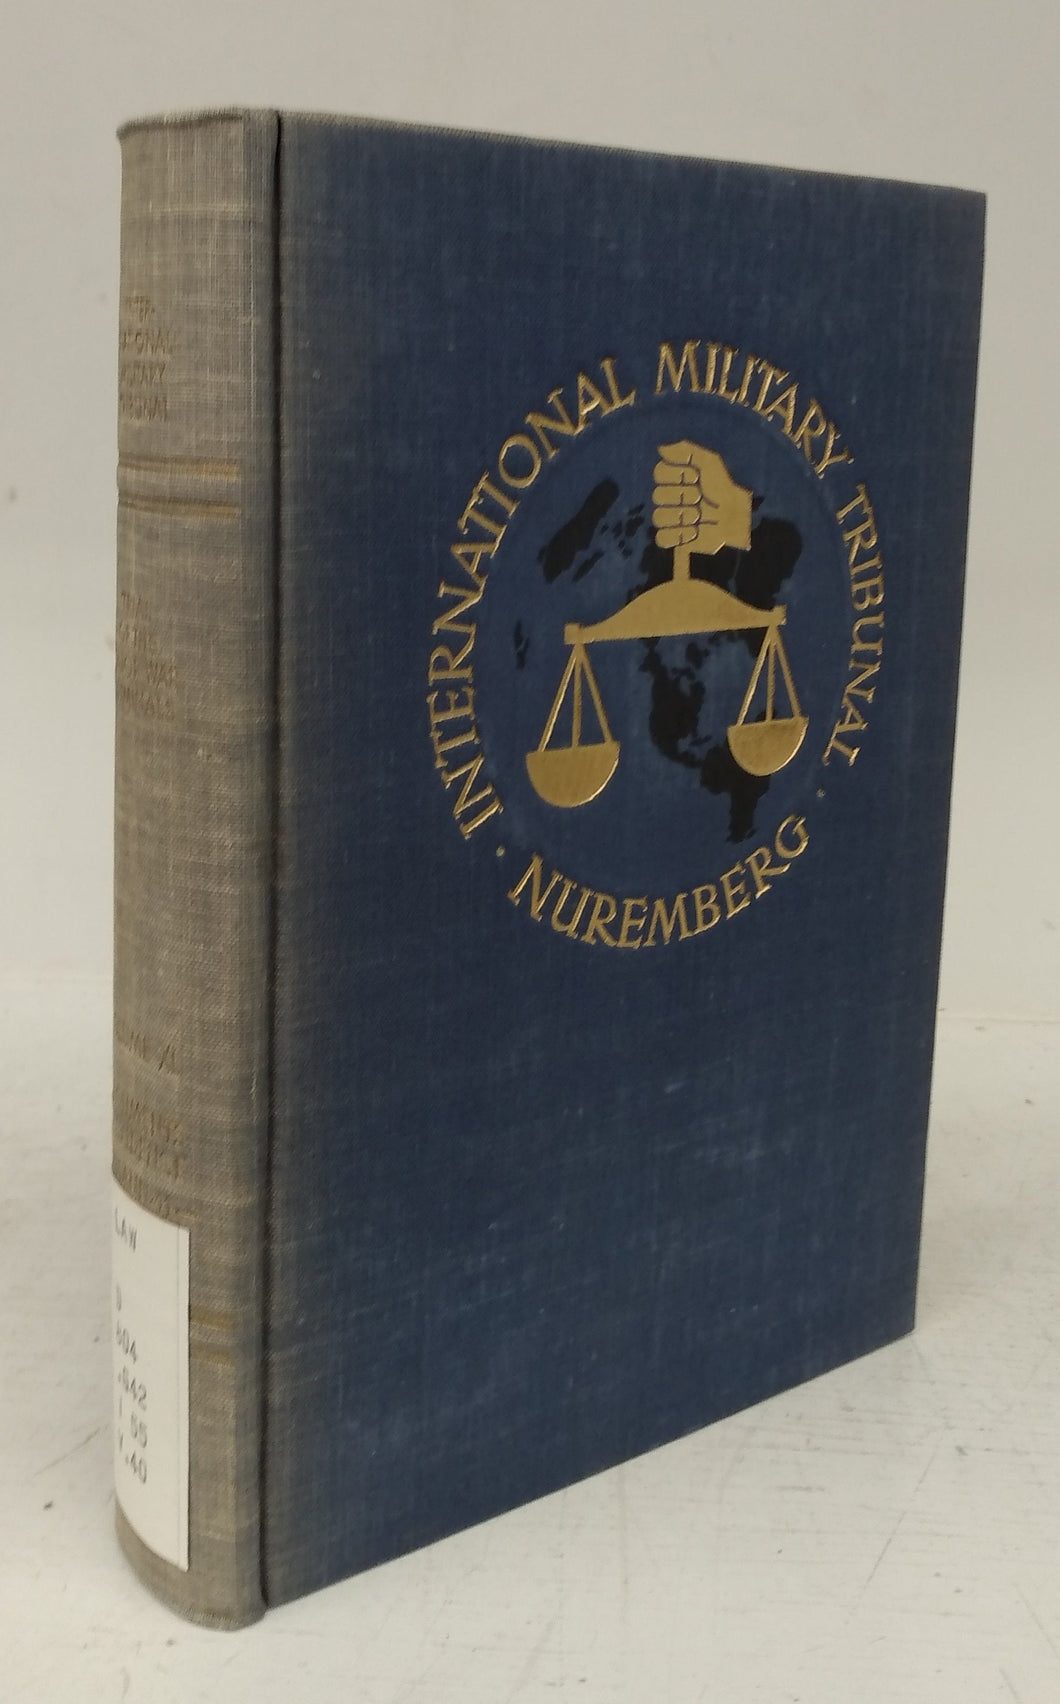 Trial of the Major War Criminals before the International Military Tribunal, Nuremberg, 14 November 1945 - 1 October 1946 (Volume XL - Documents and Other Material in Evidence Bormann-11 to Raeder-7)